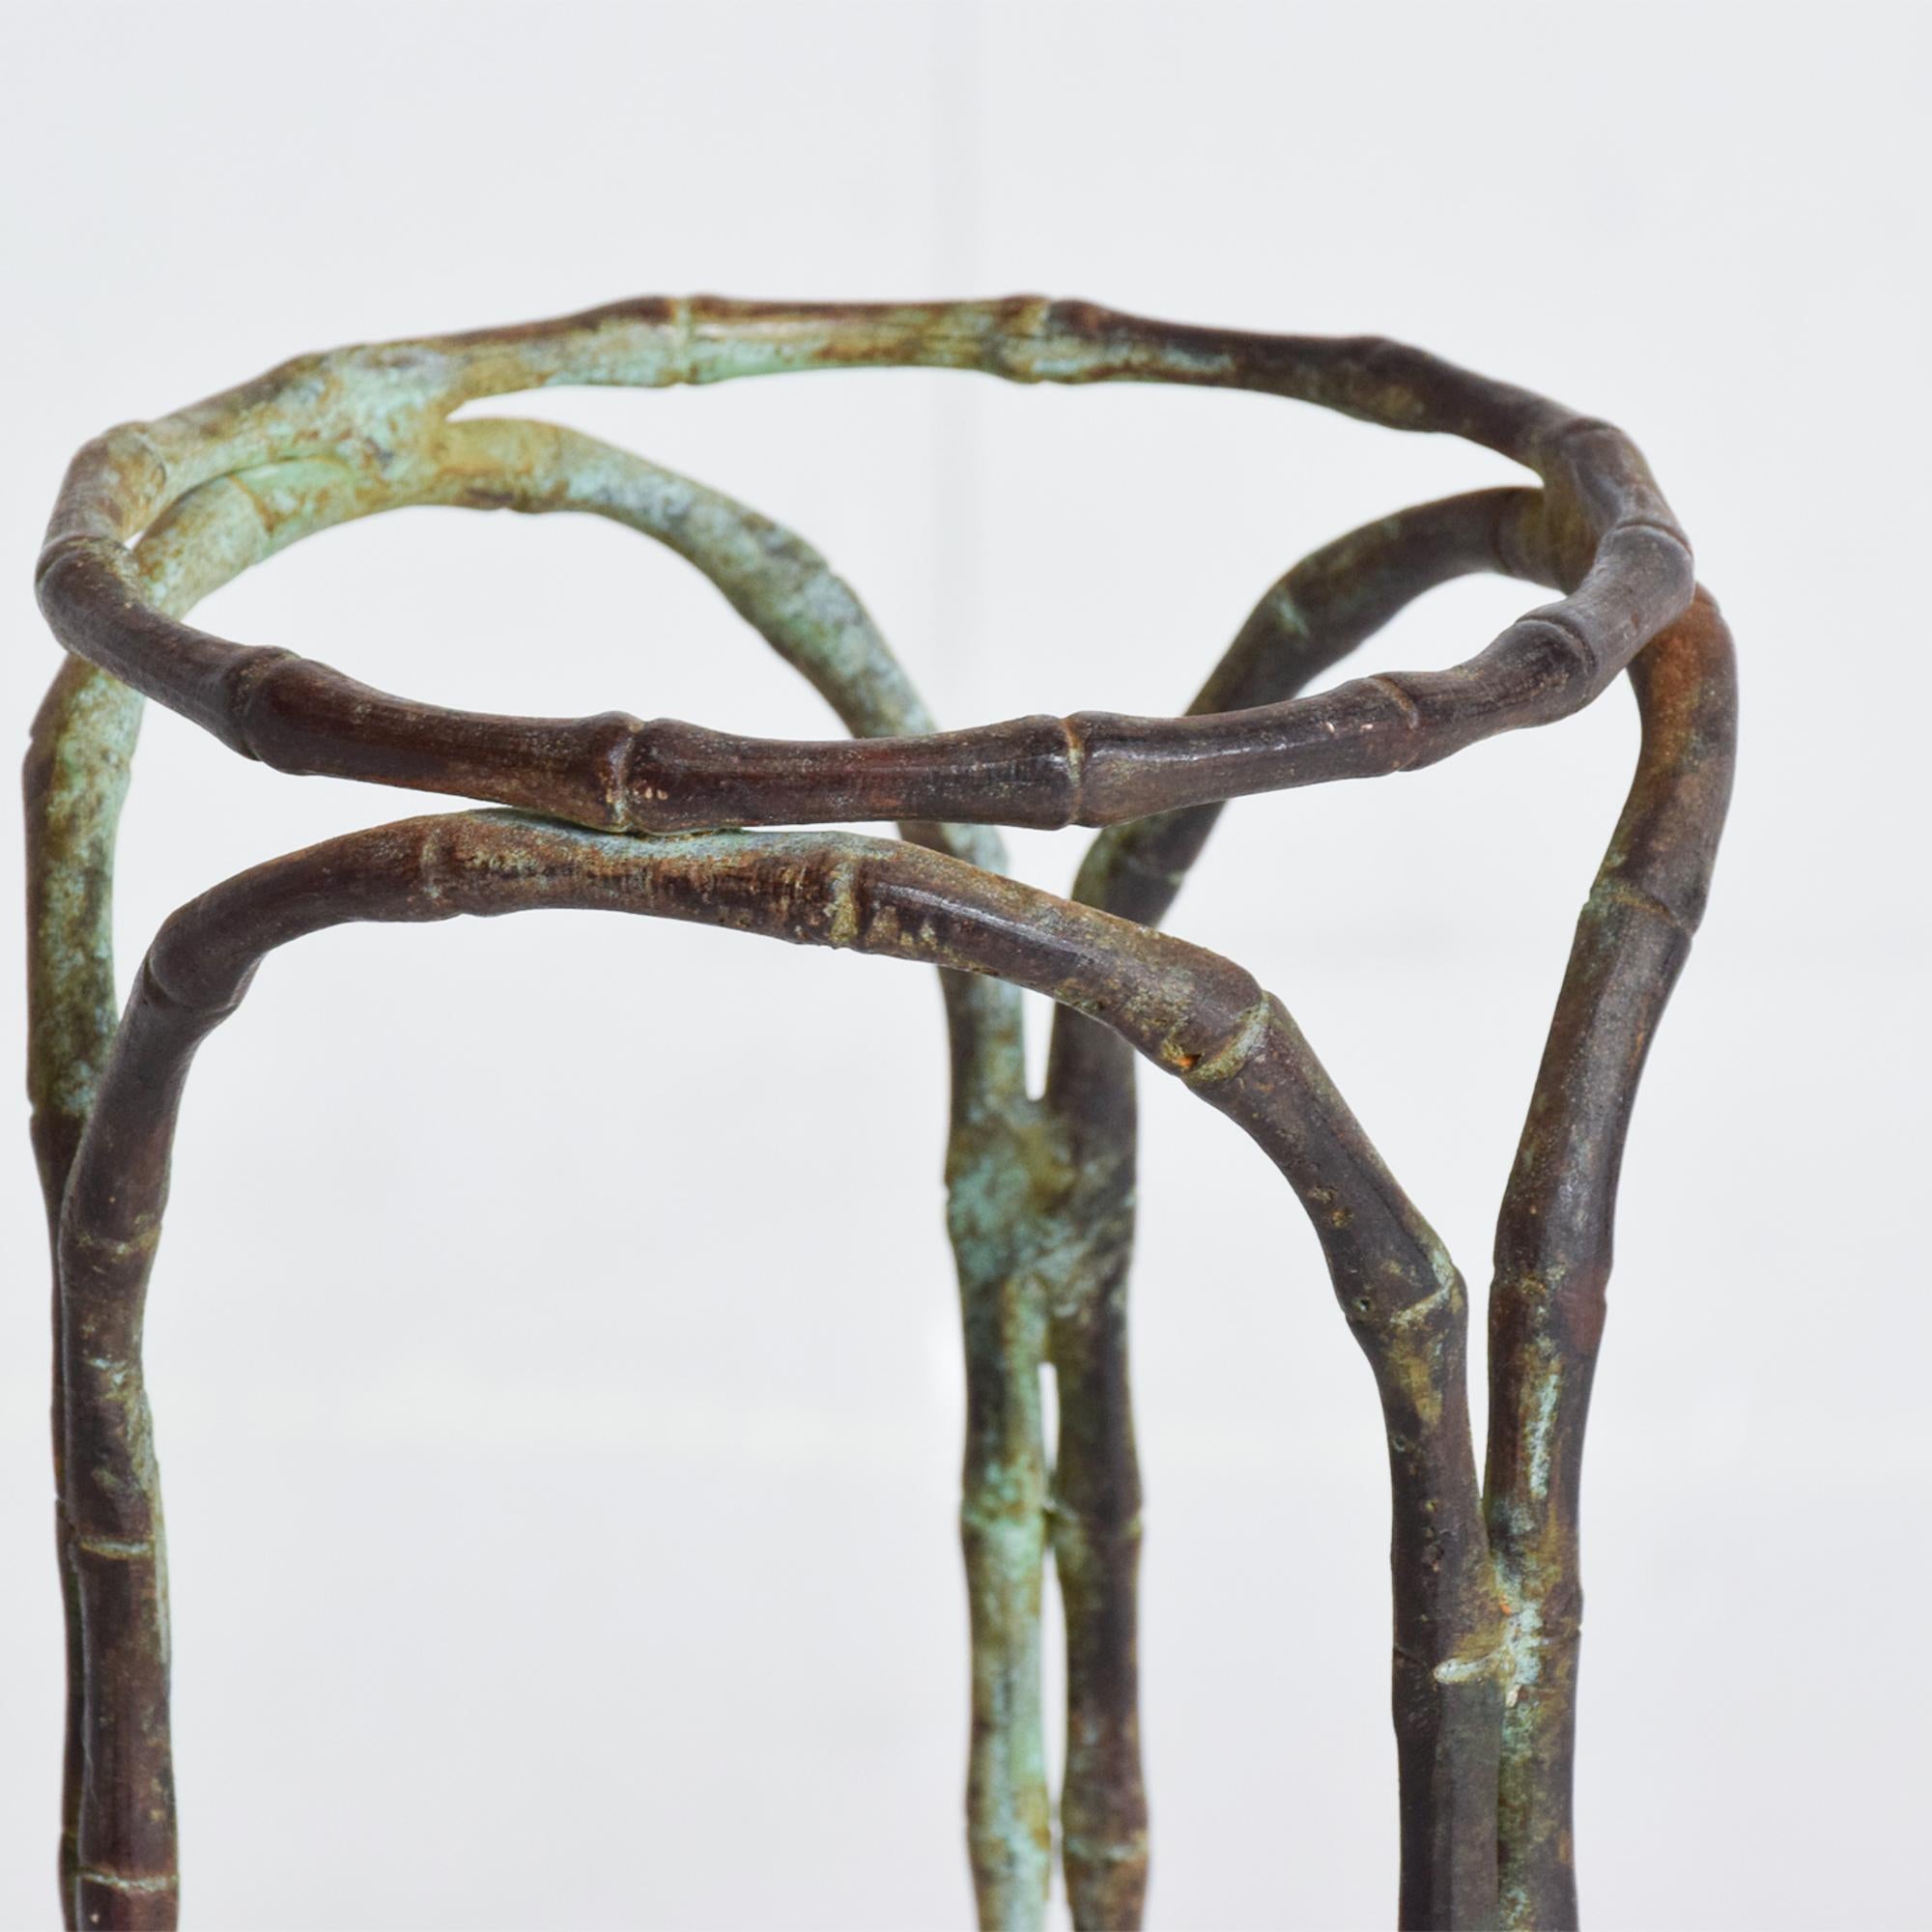 Hollywood Regency elegant faux bamboo pedestal vase stand (garden planter element) in Bronze embodies rich verdigris patina.
Unmarked, no markings from the maker.
In the style of Giacometti from France circa 1960s.
See dealer for additional